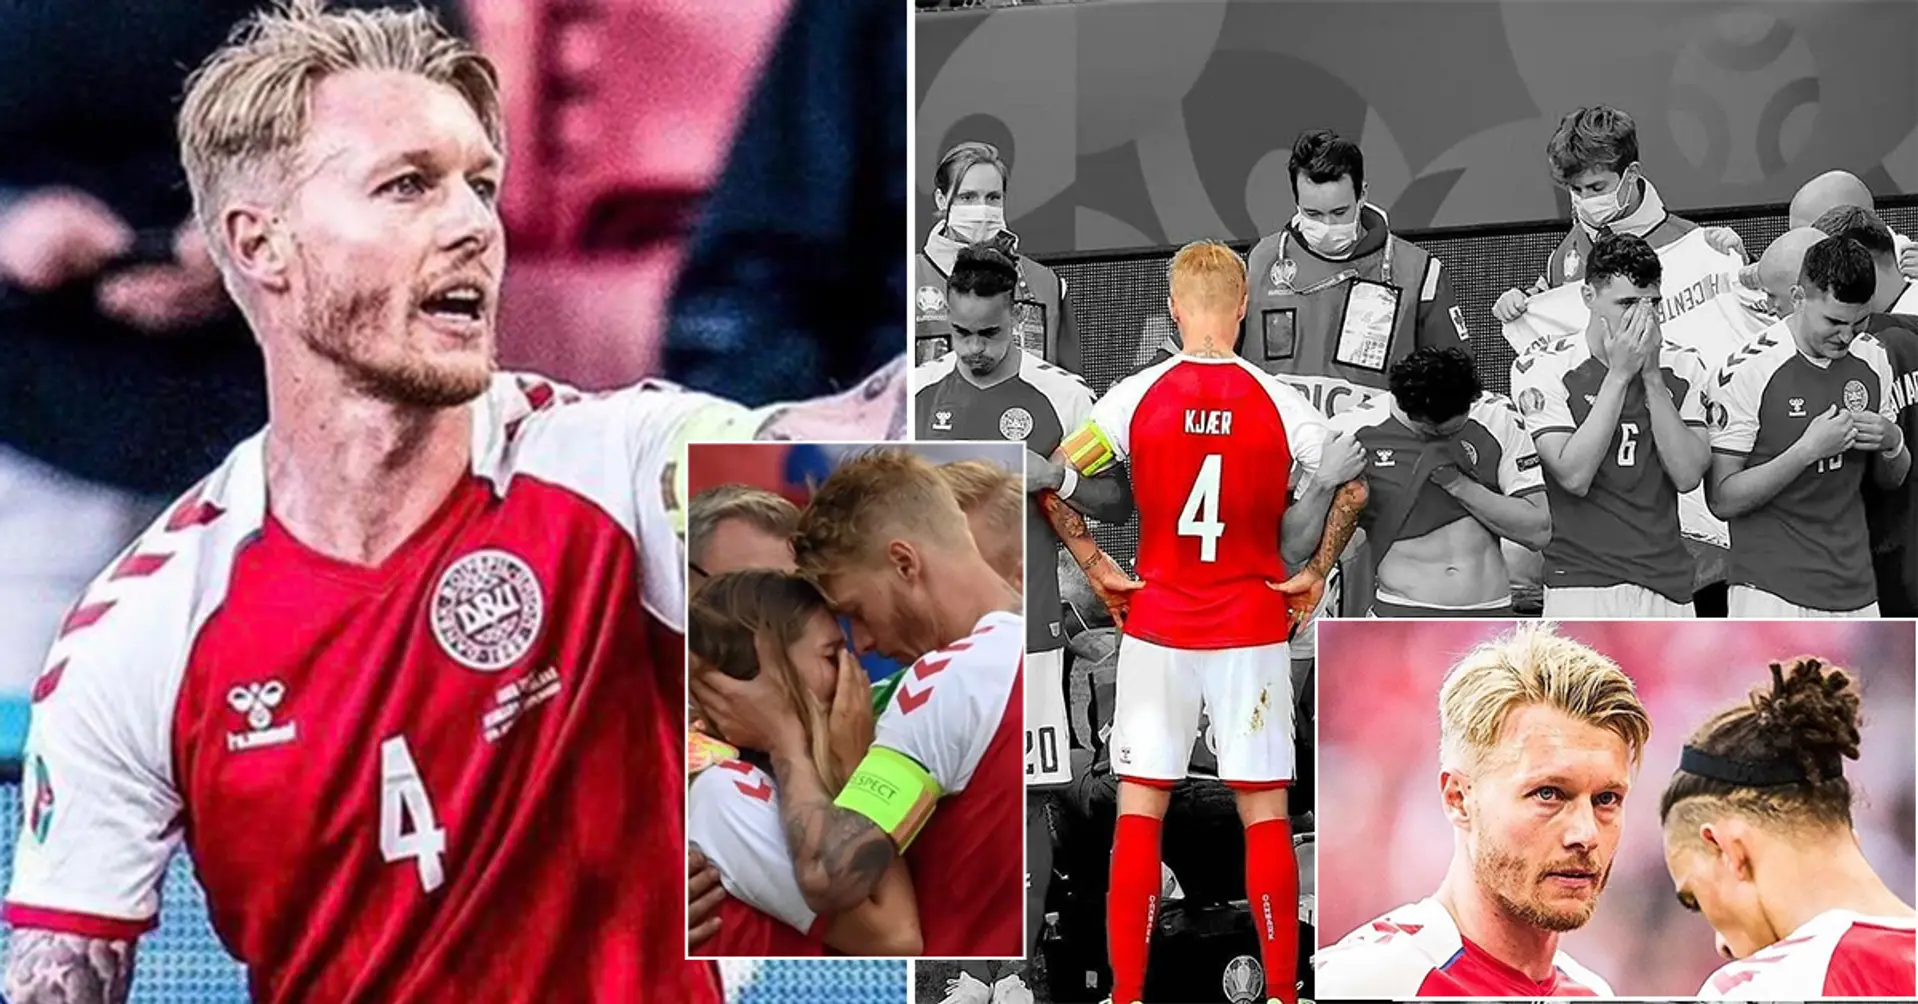 HERO: Simon Kjaer made sure Eriksen didn't swallow tongue, gave him CPR and comforted his wife